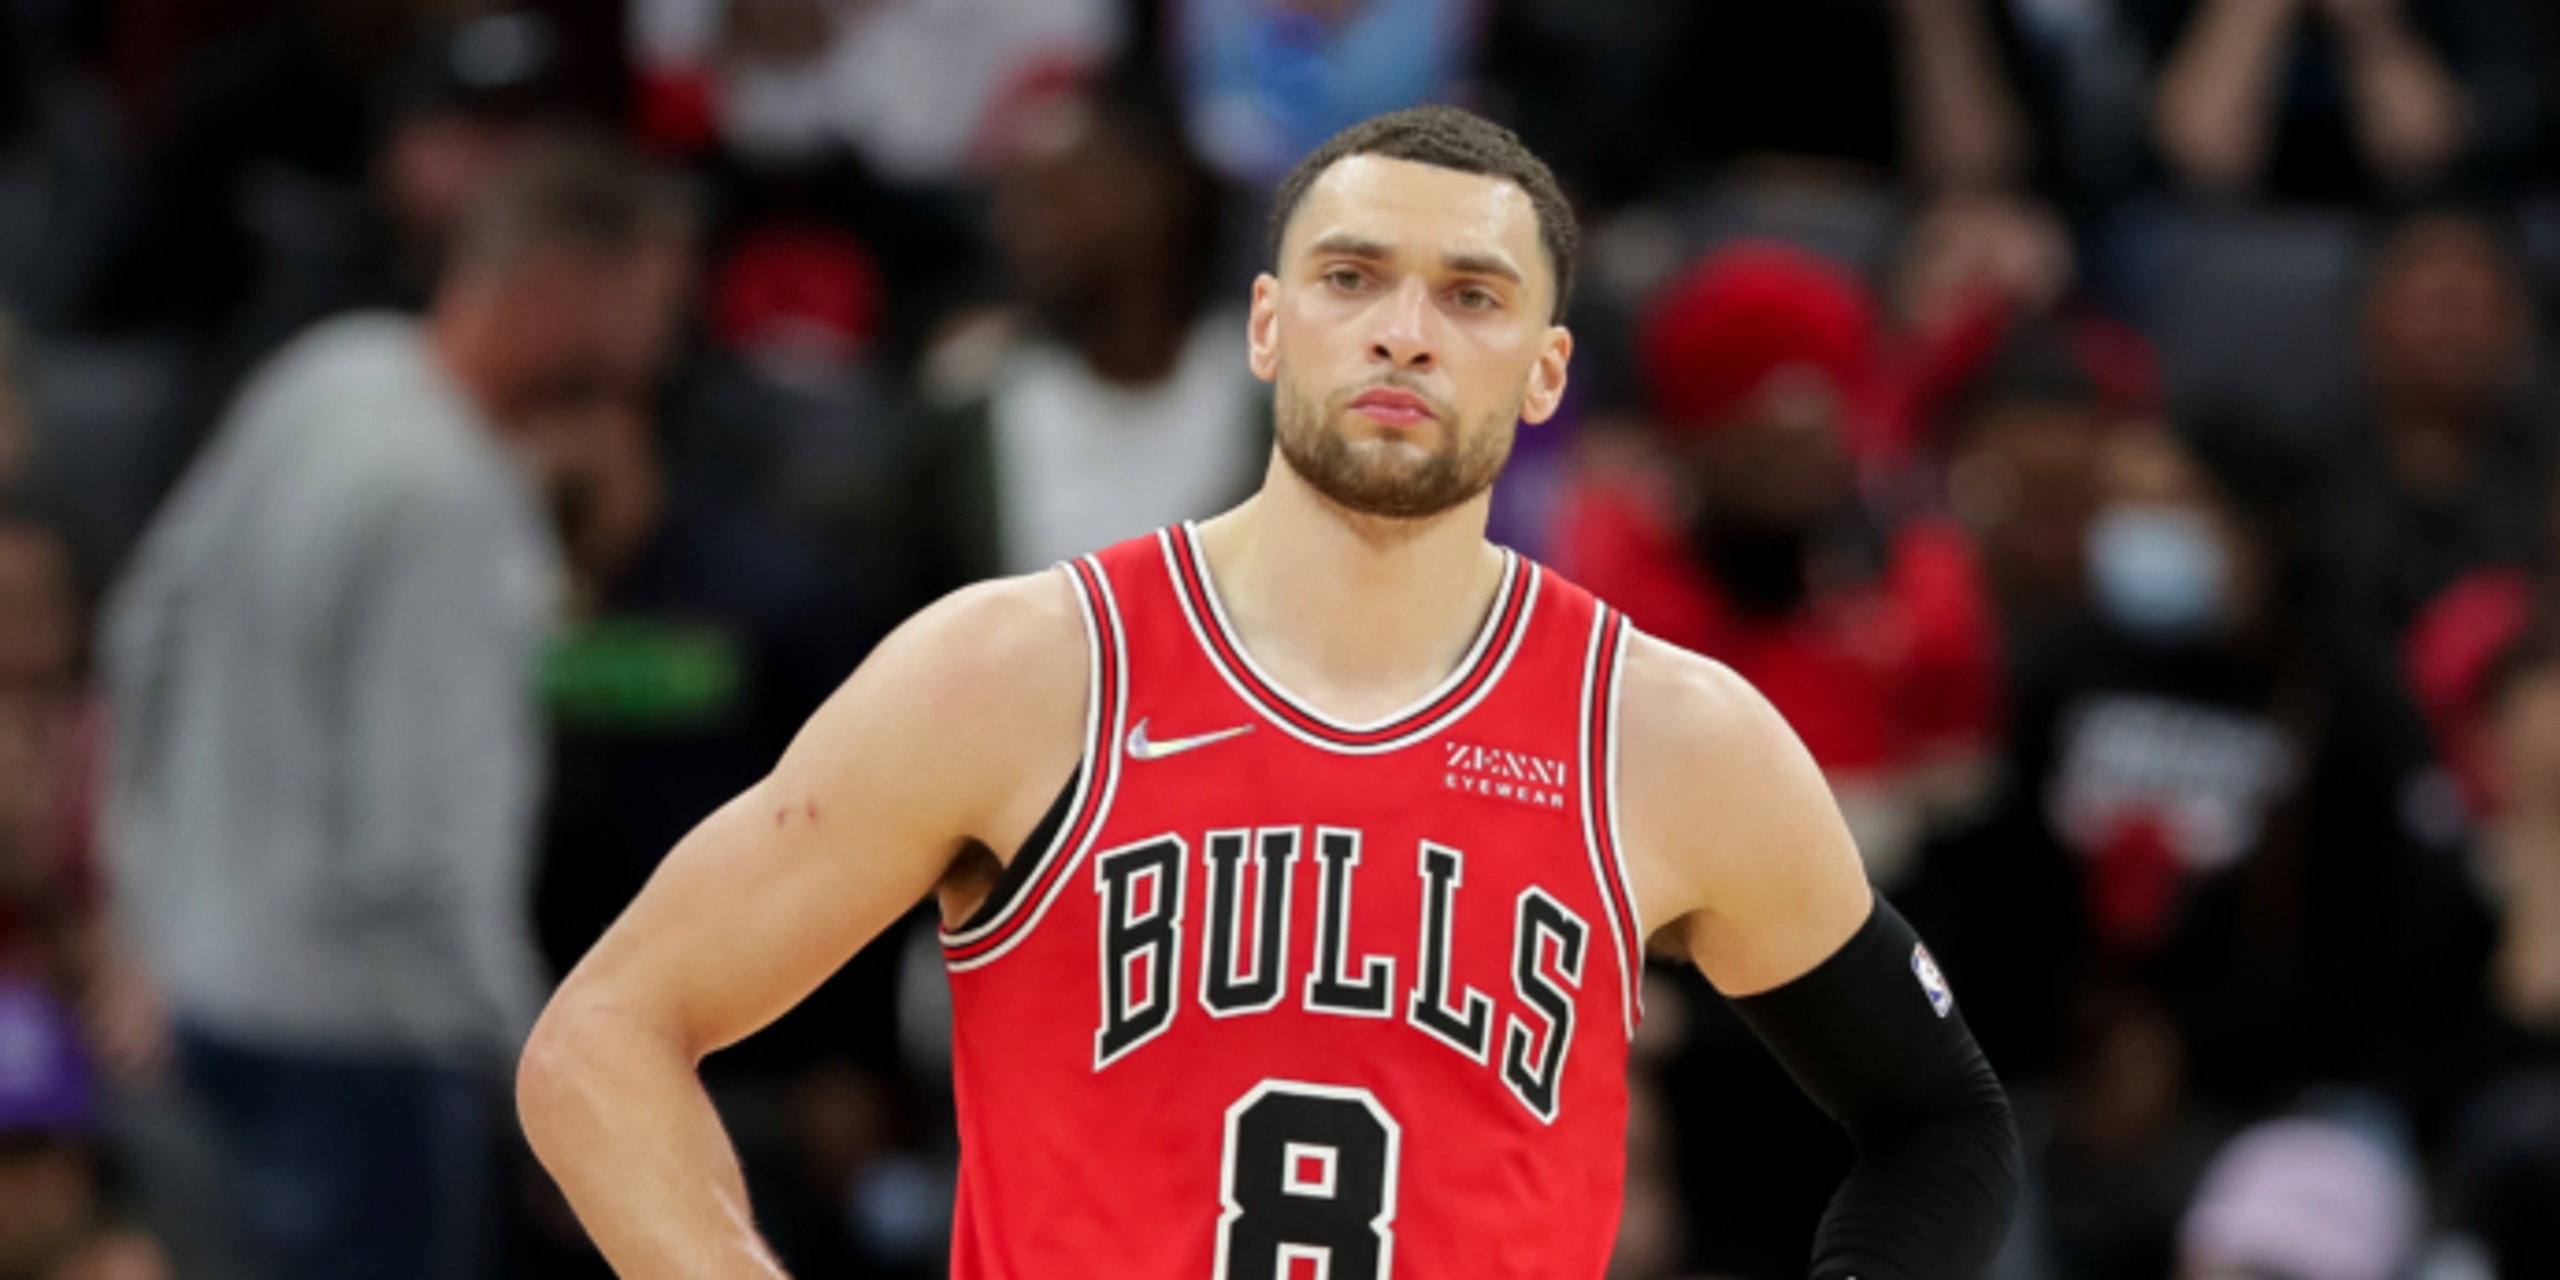 Report: Bulls expected to sign Zach LaVine to five-year max deal